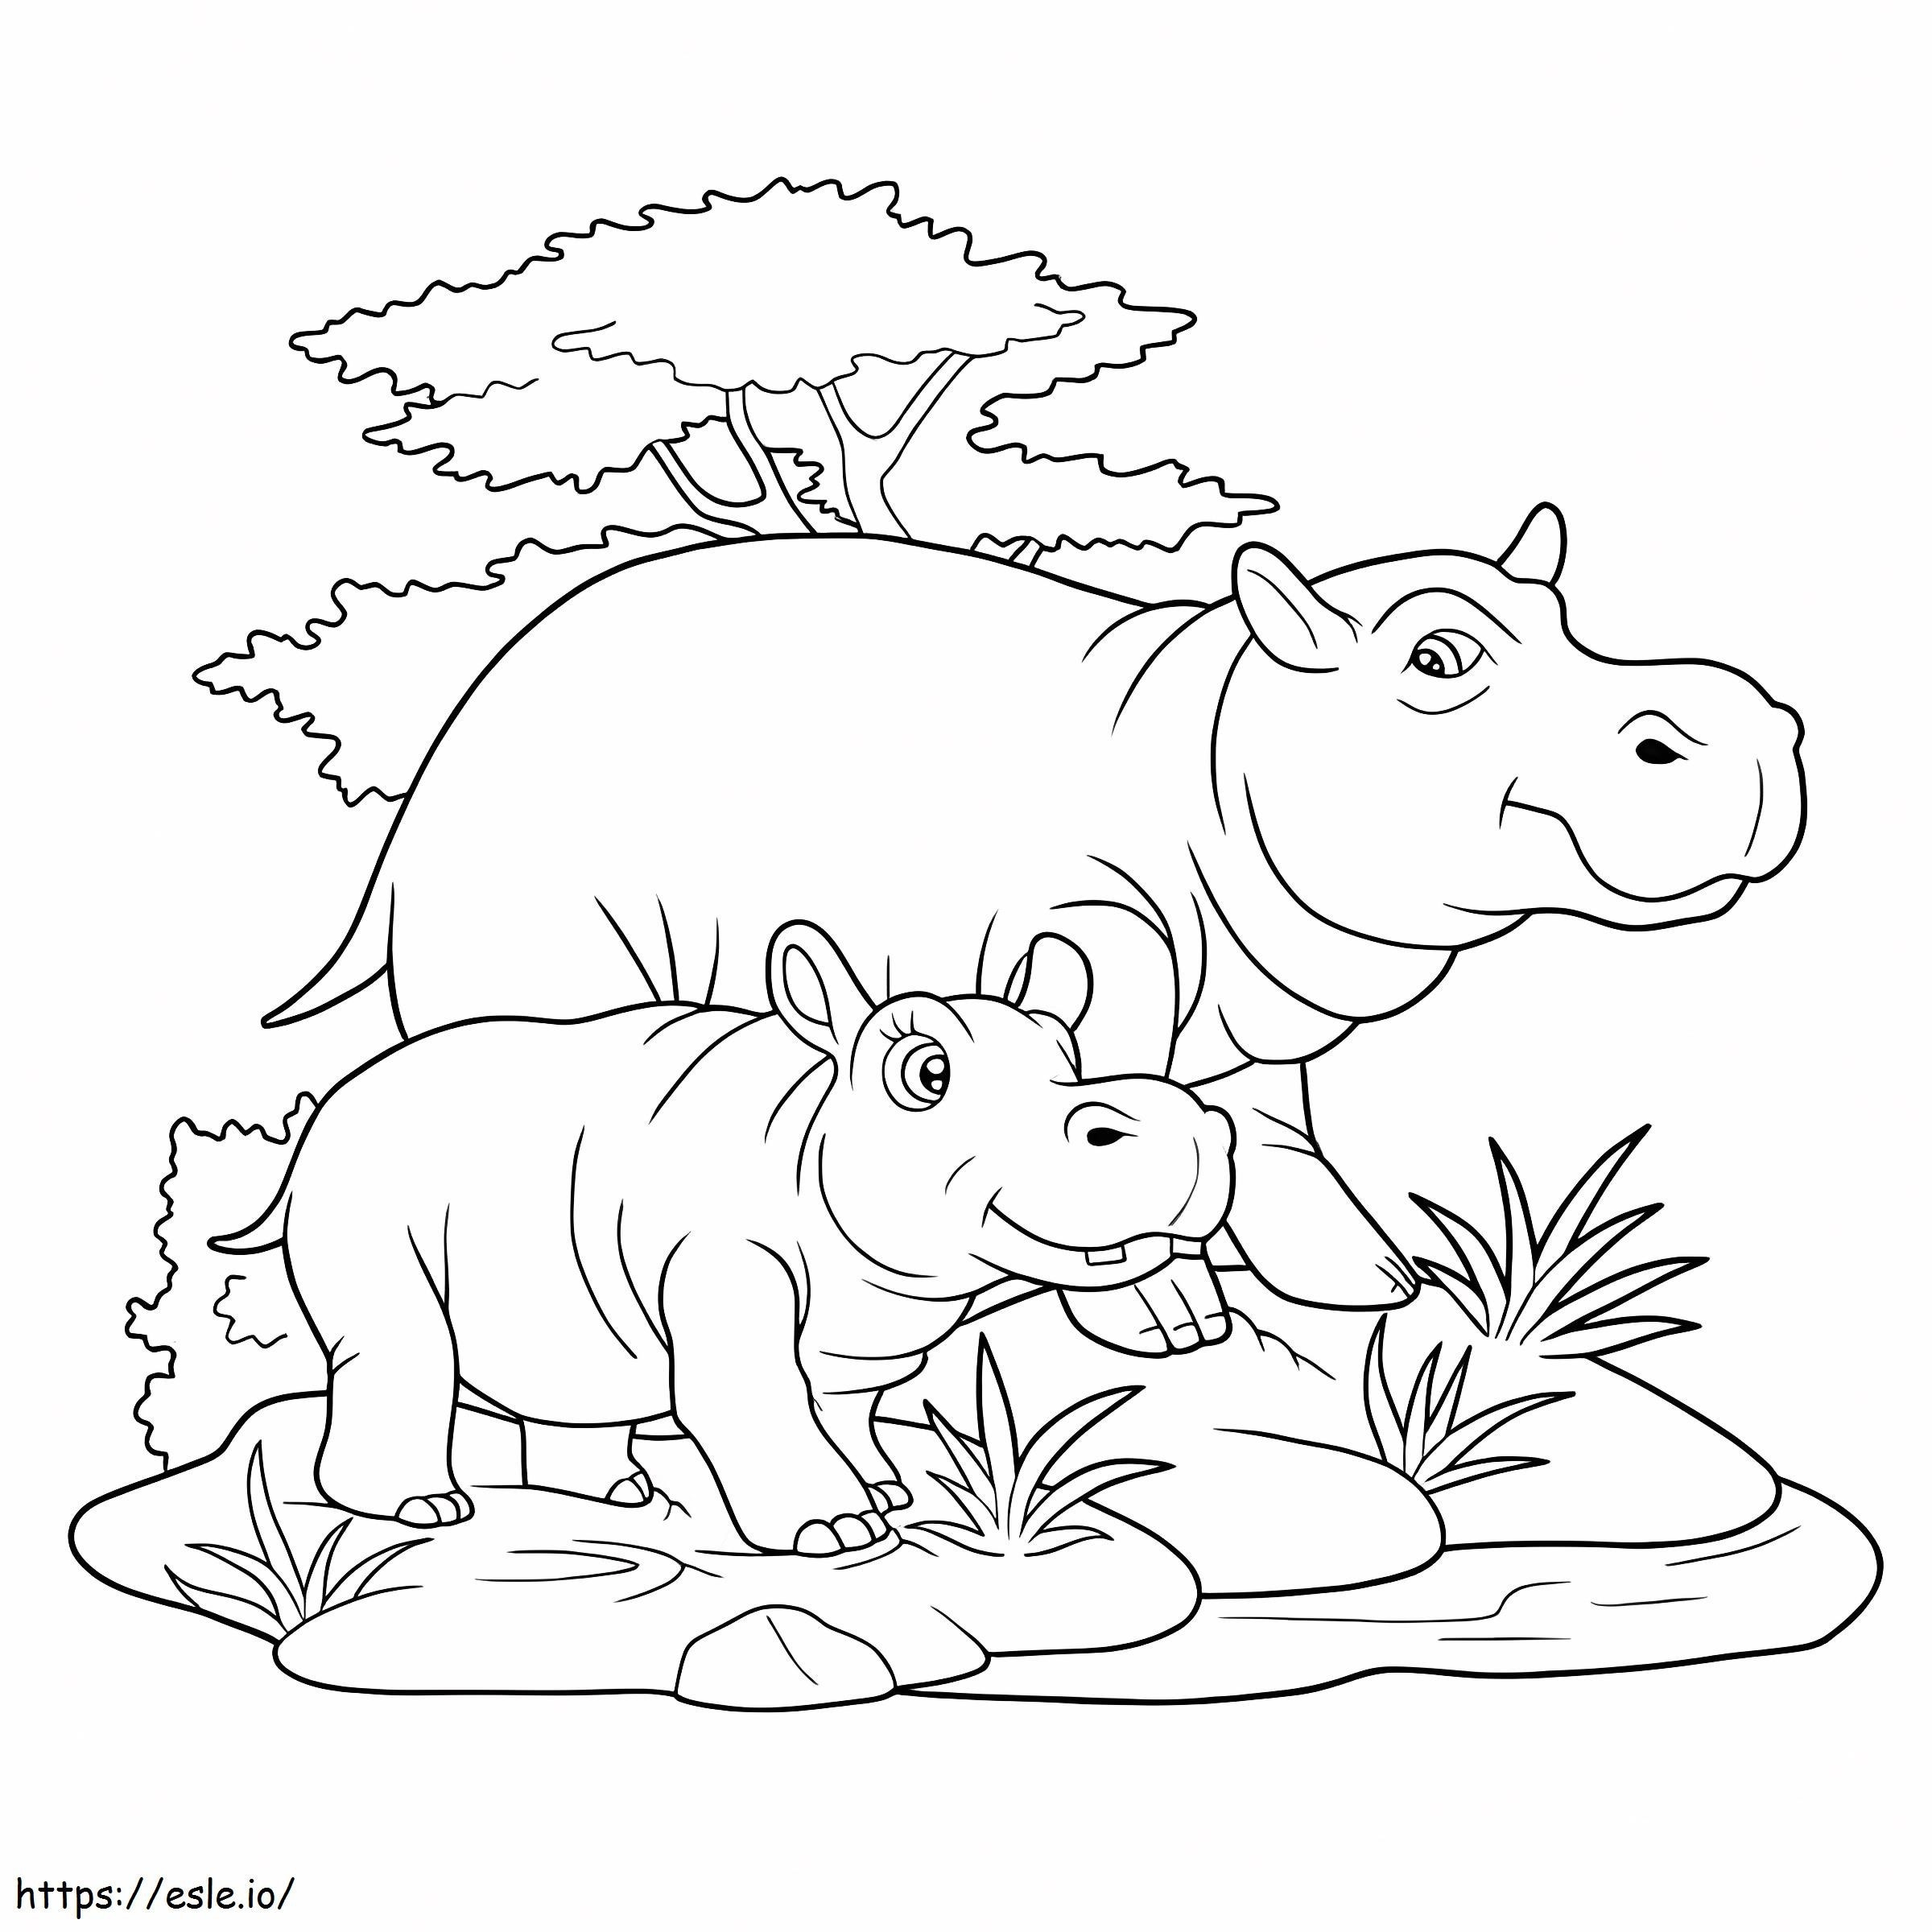 Basic Hippo Mother And Baby Hippo coloring page